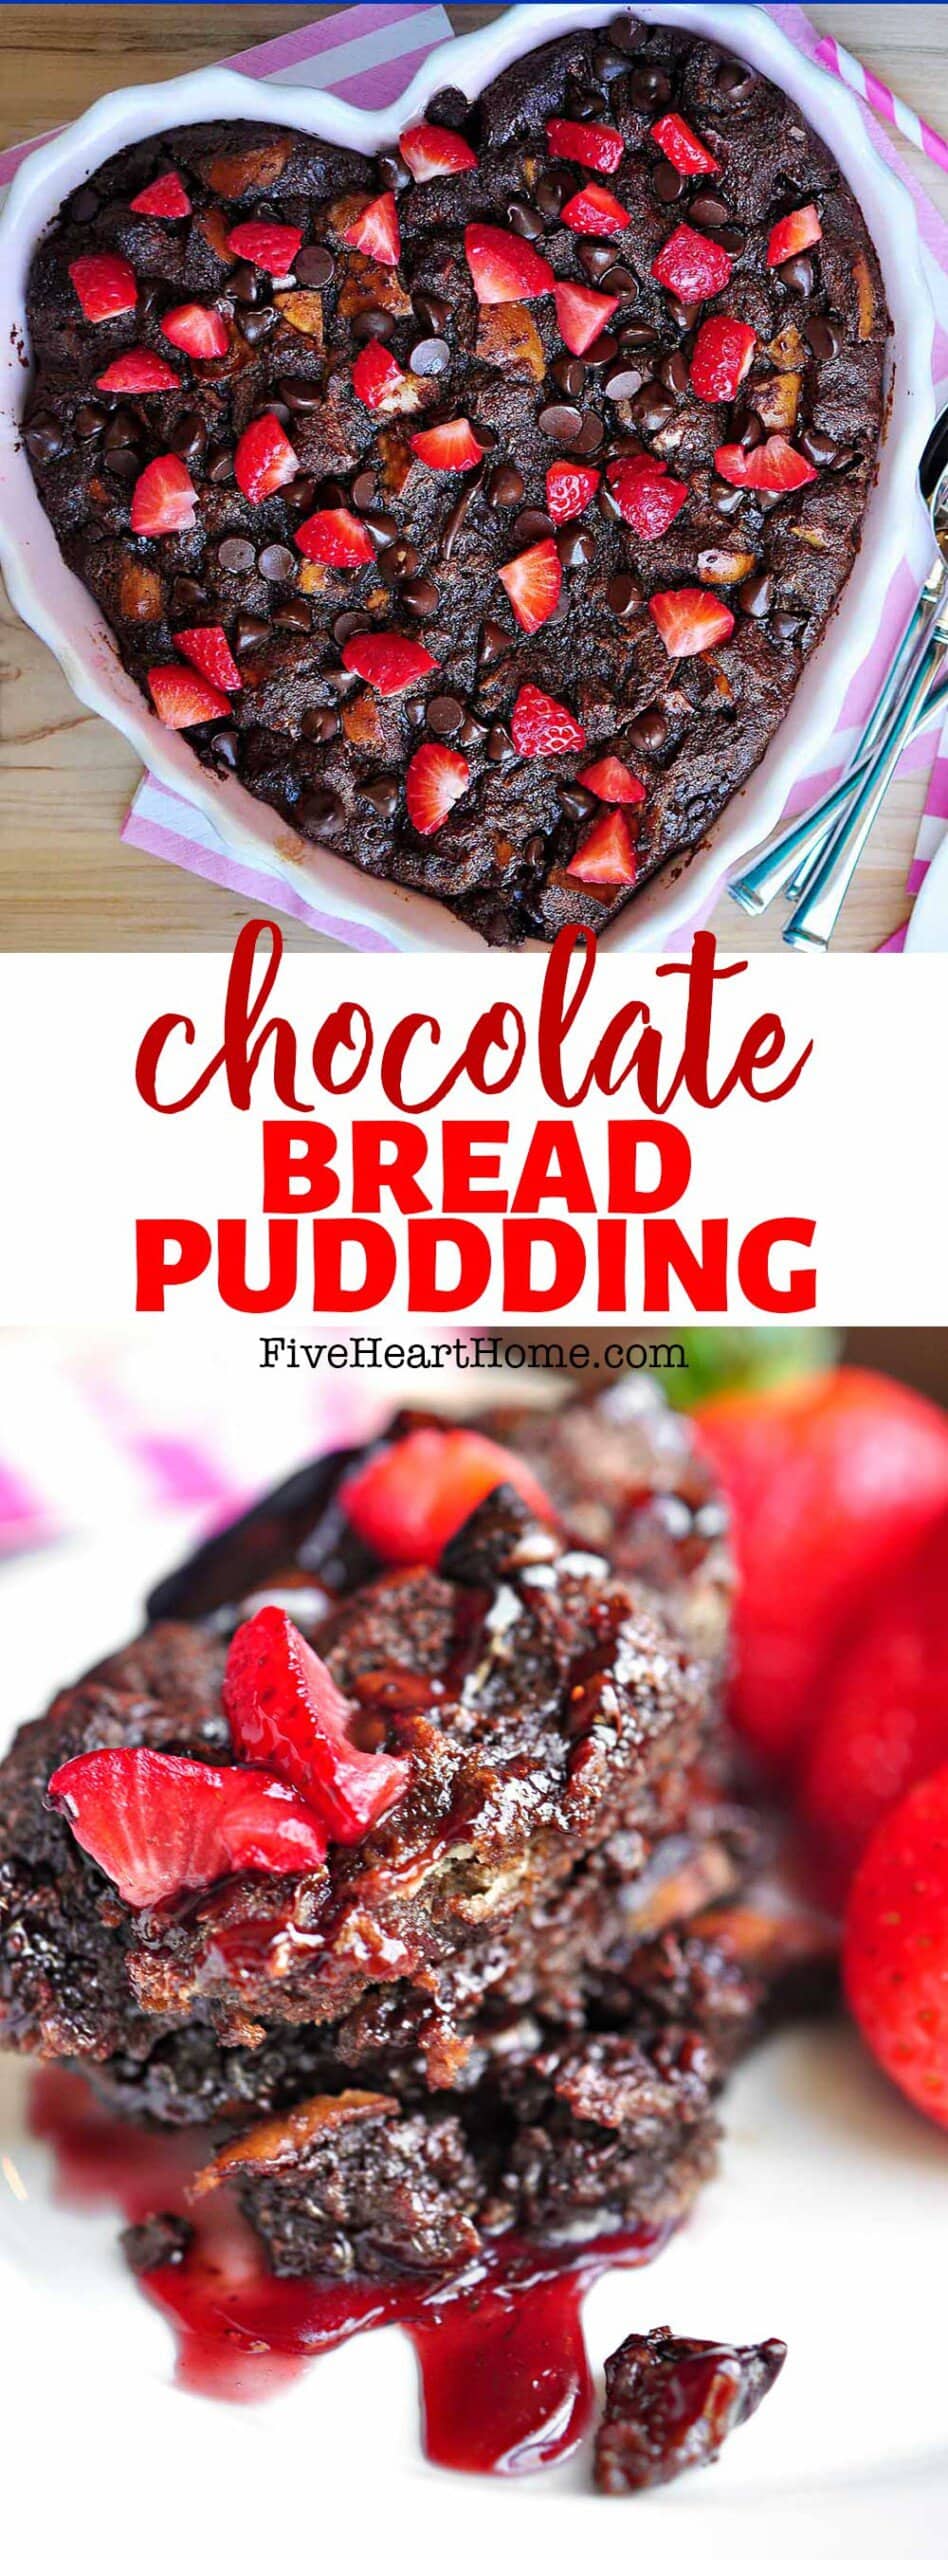 Chocolate Bread Pudding ~ a warm and decadent dessert of bread cubes soaked in a rich chocolate custard and then layered with more chocolate before being baked and served warm with a drizzle of raspberry sauce! | FiveHeartHome.com via @fivehearthome